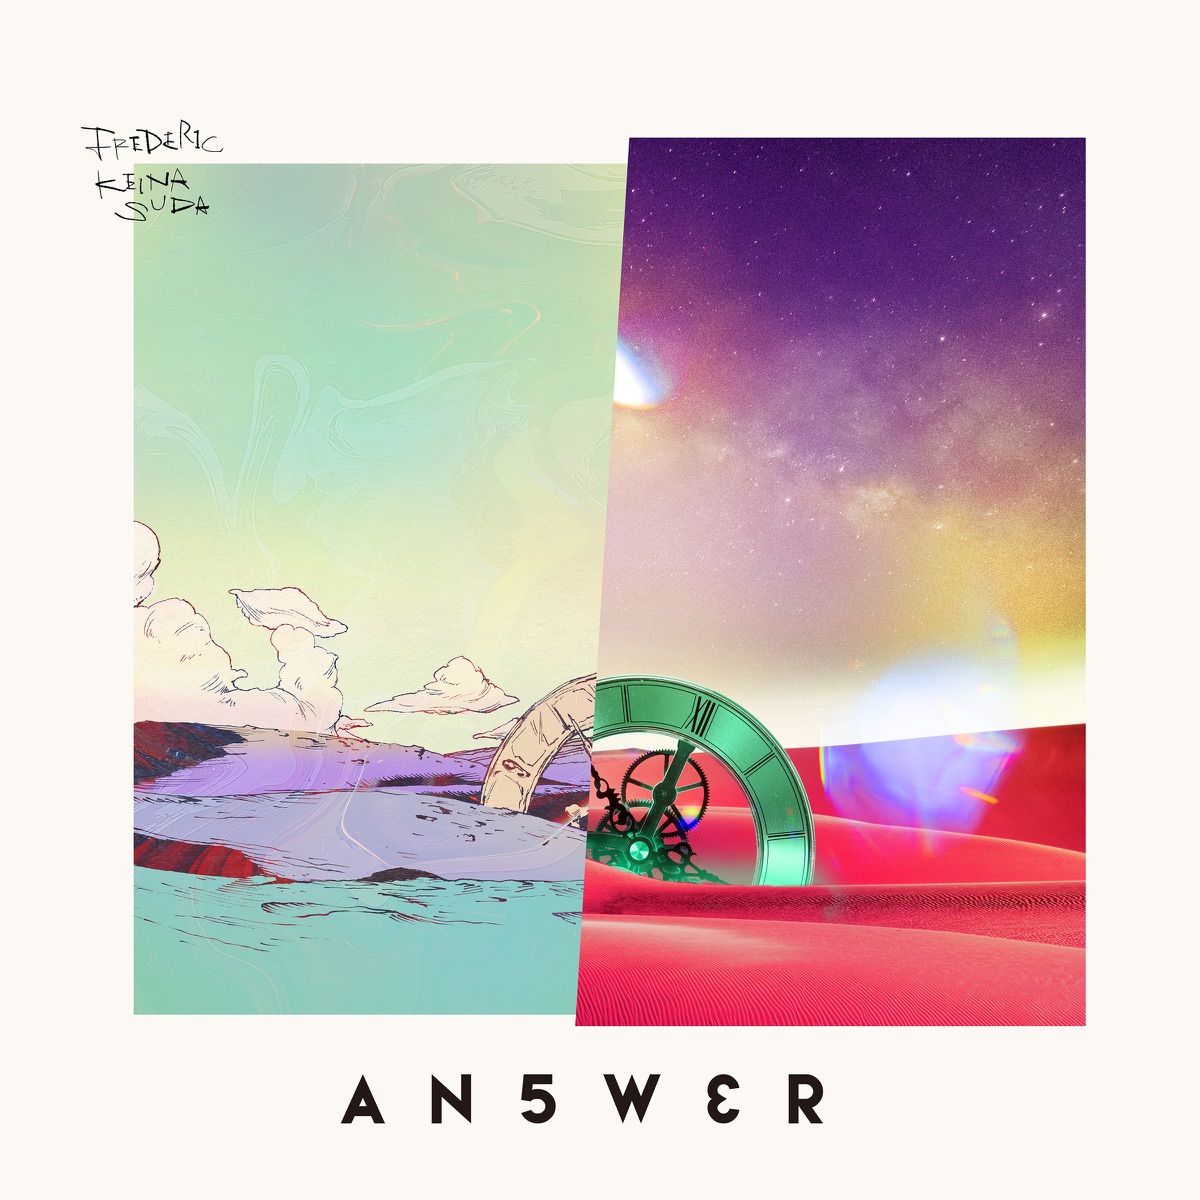 Cover for『Frederic - TOMOSHI BEAT』from the release『ANSWER』